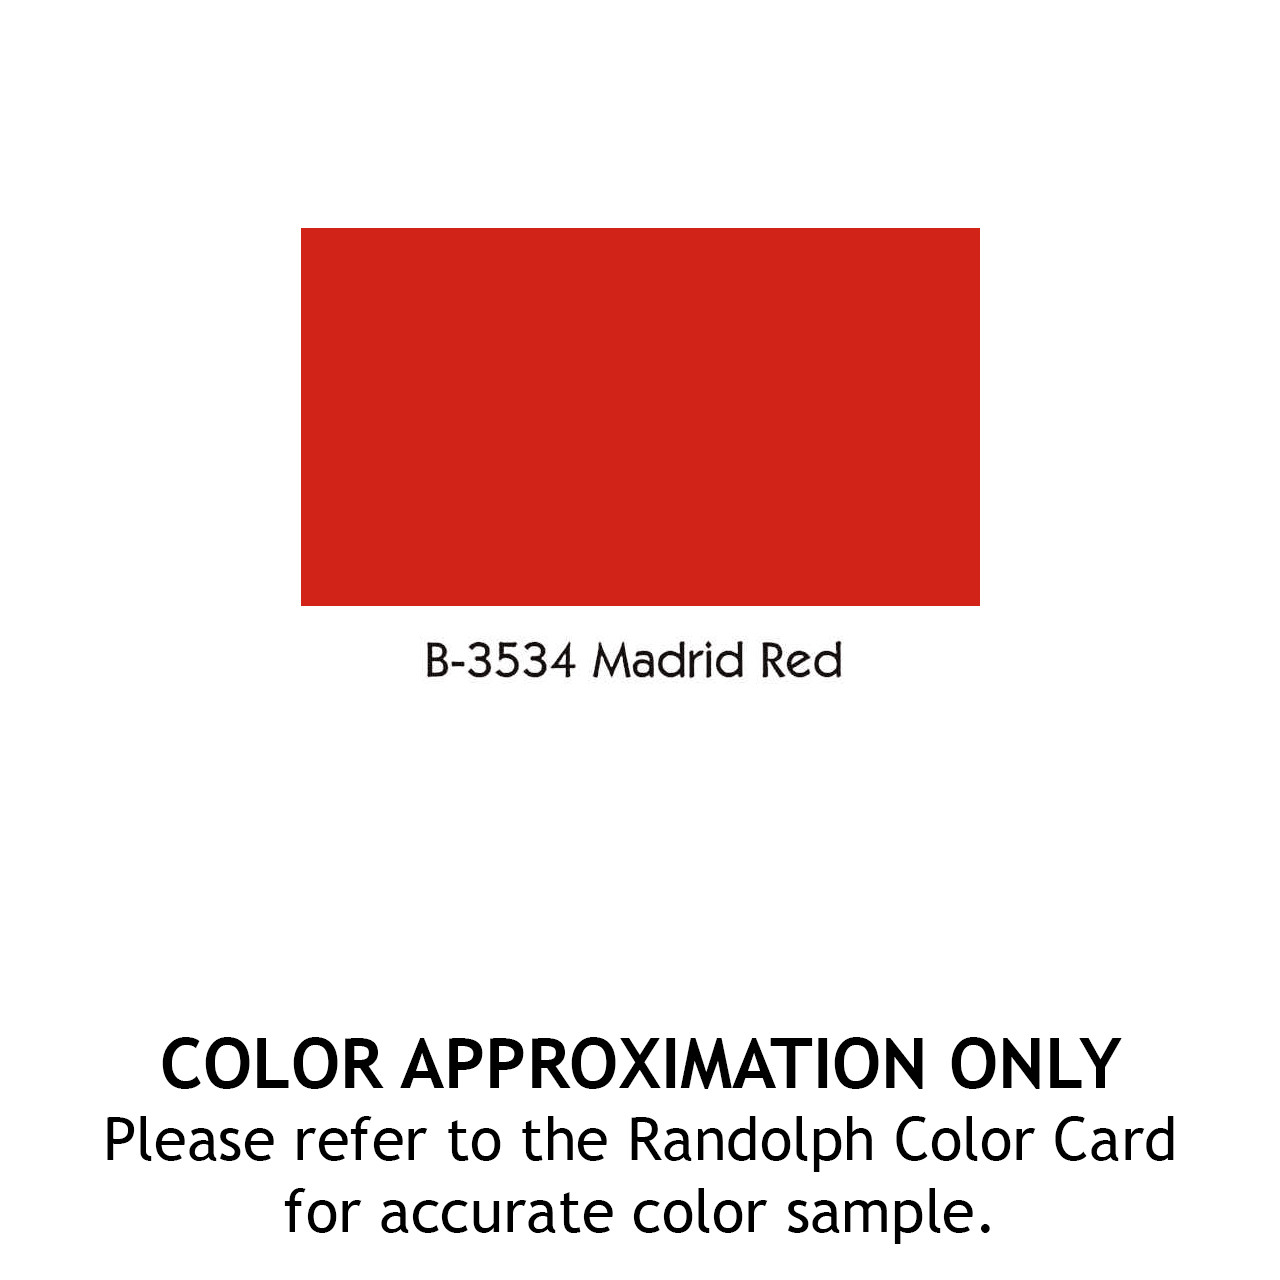 RANDOLPH COLORED BUTYRATE DOPE - MADRID RED